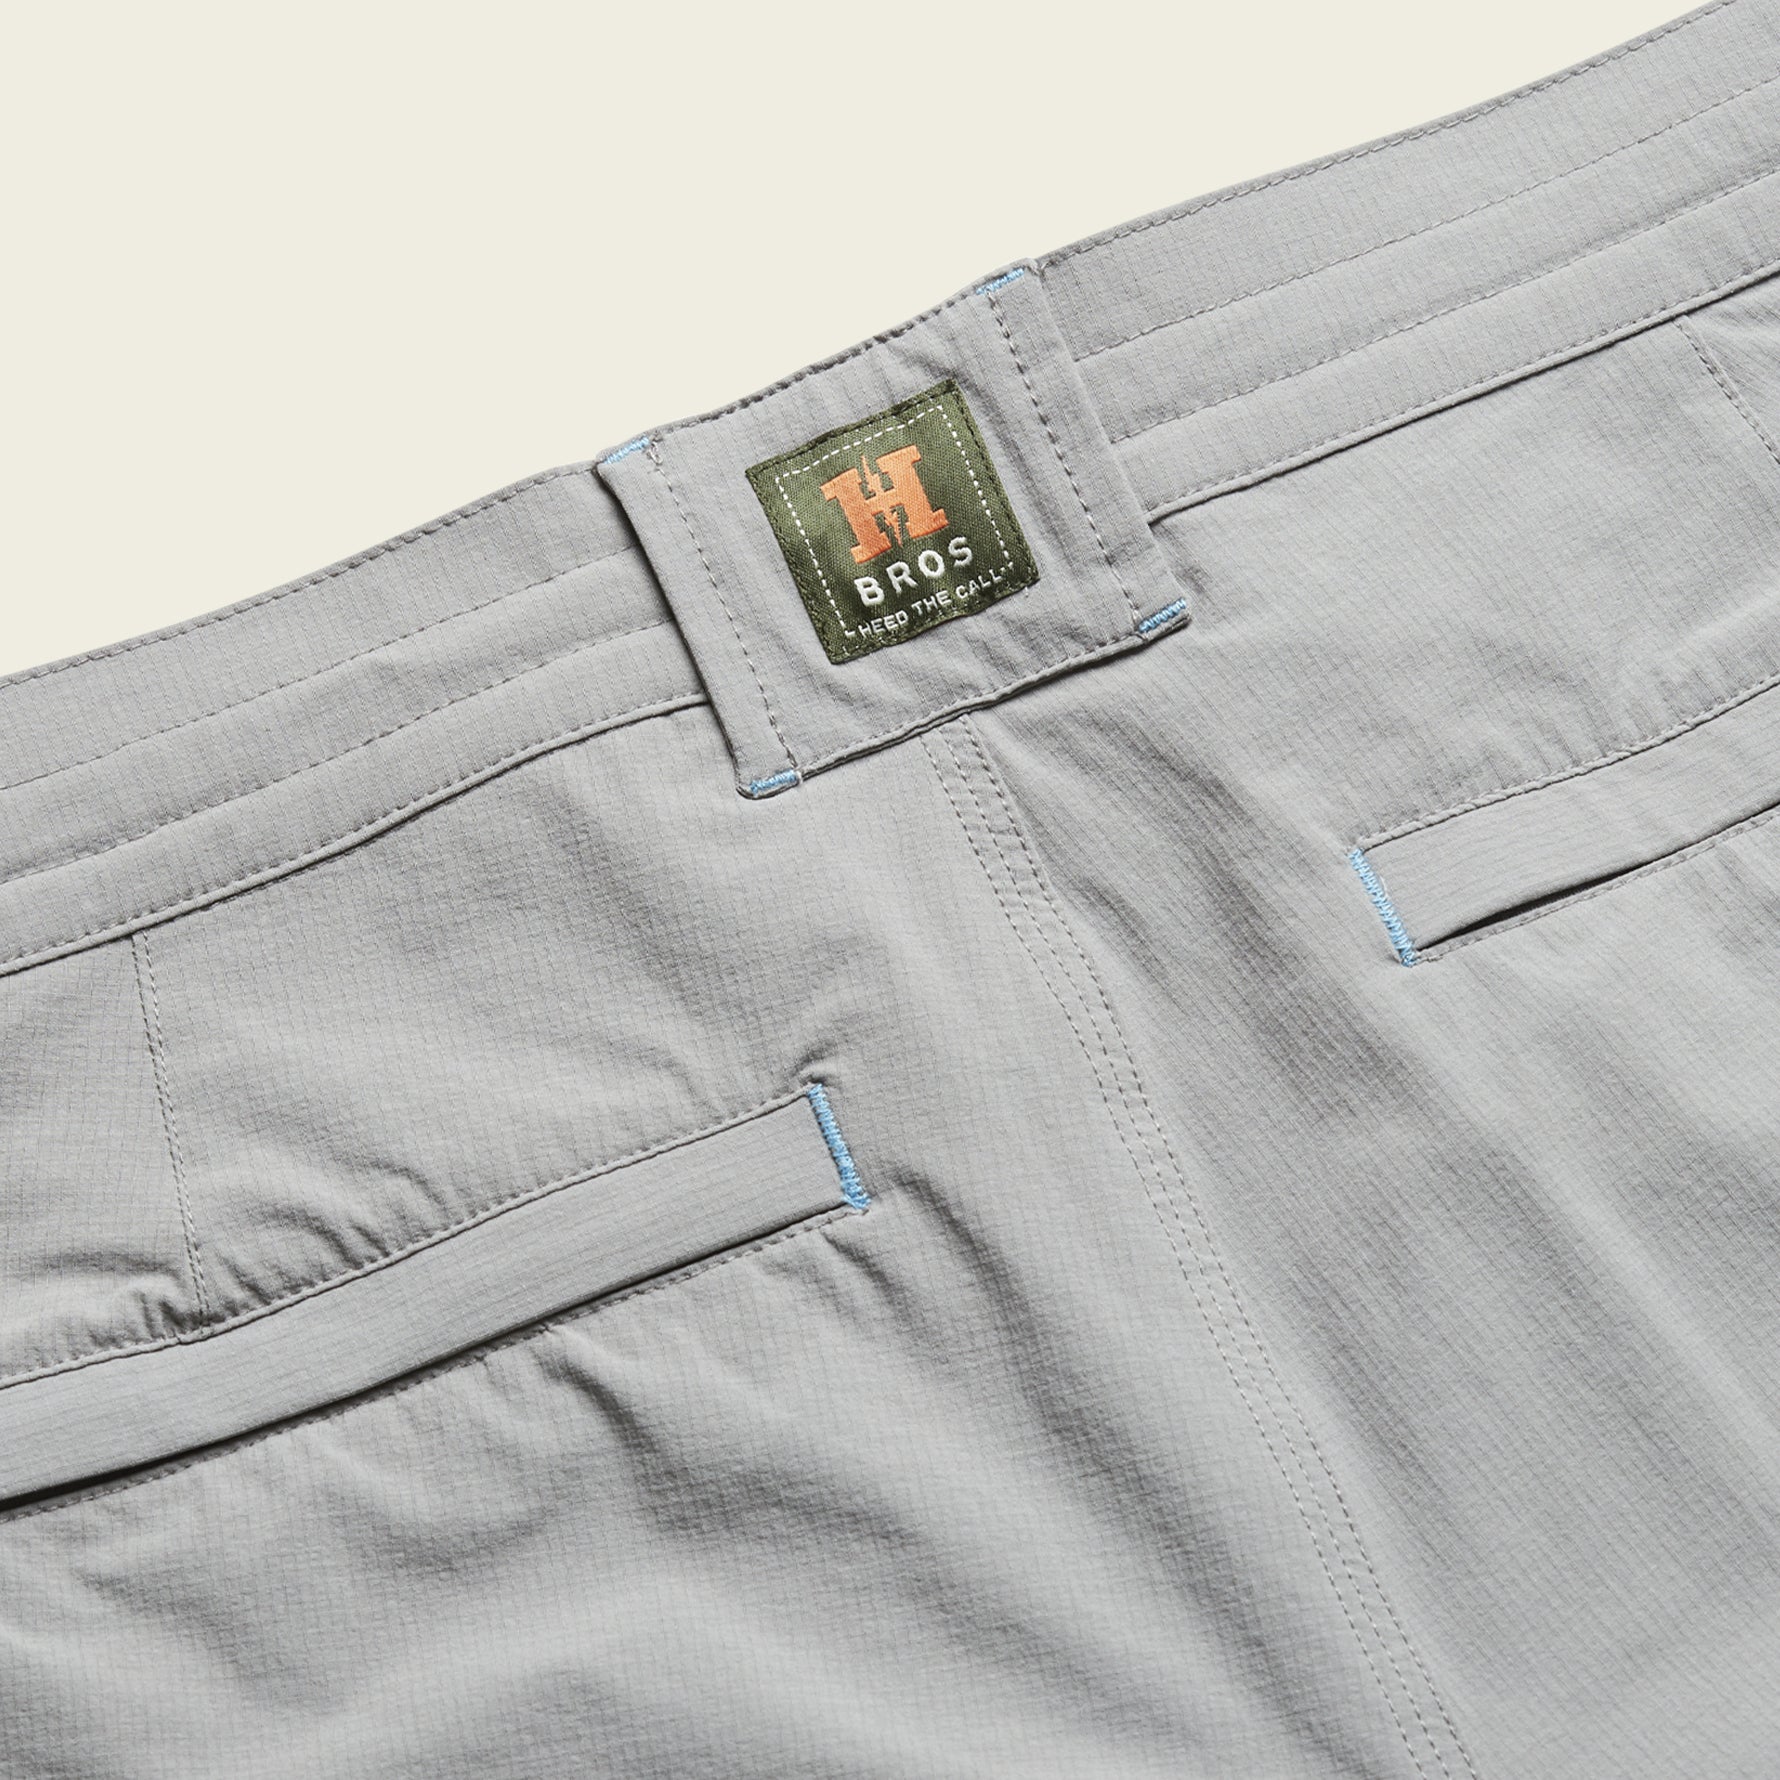 Howler Brothers Shoalwater Tech Pants - 88 Gear